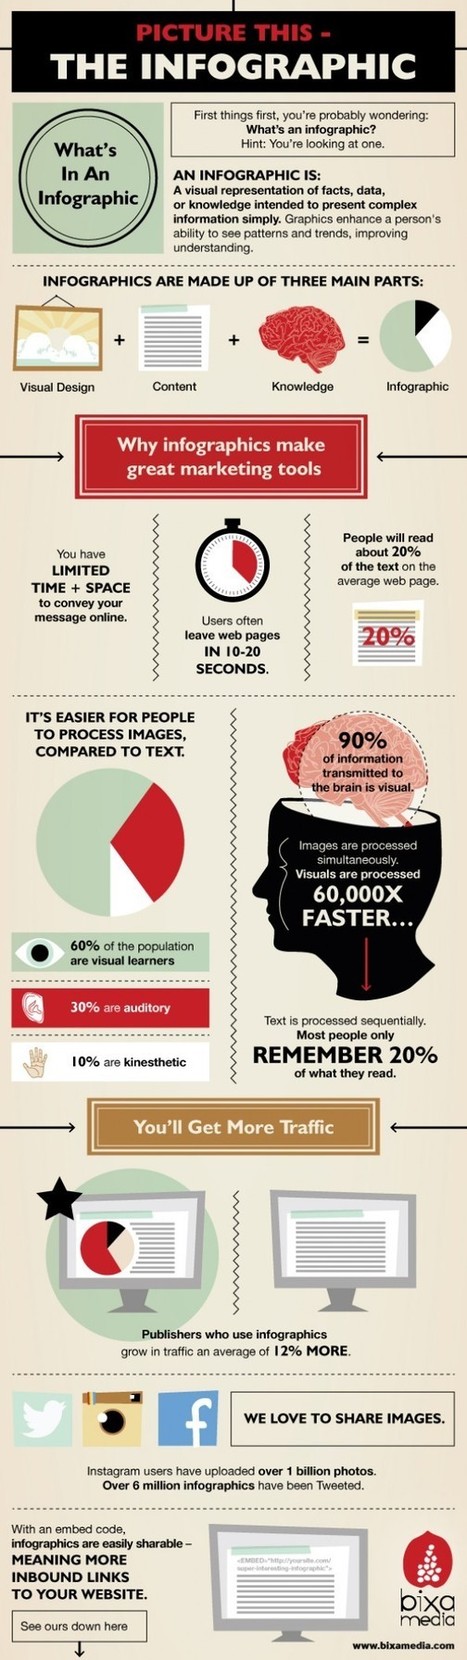 An Infographic About Infographics | Rapid eLearning | Scoop.it